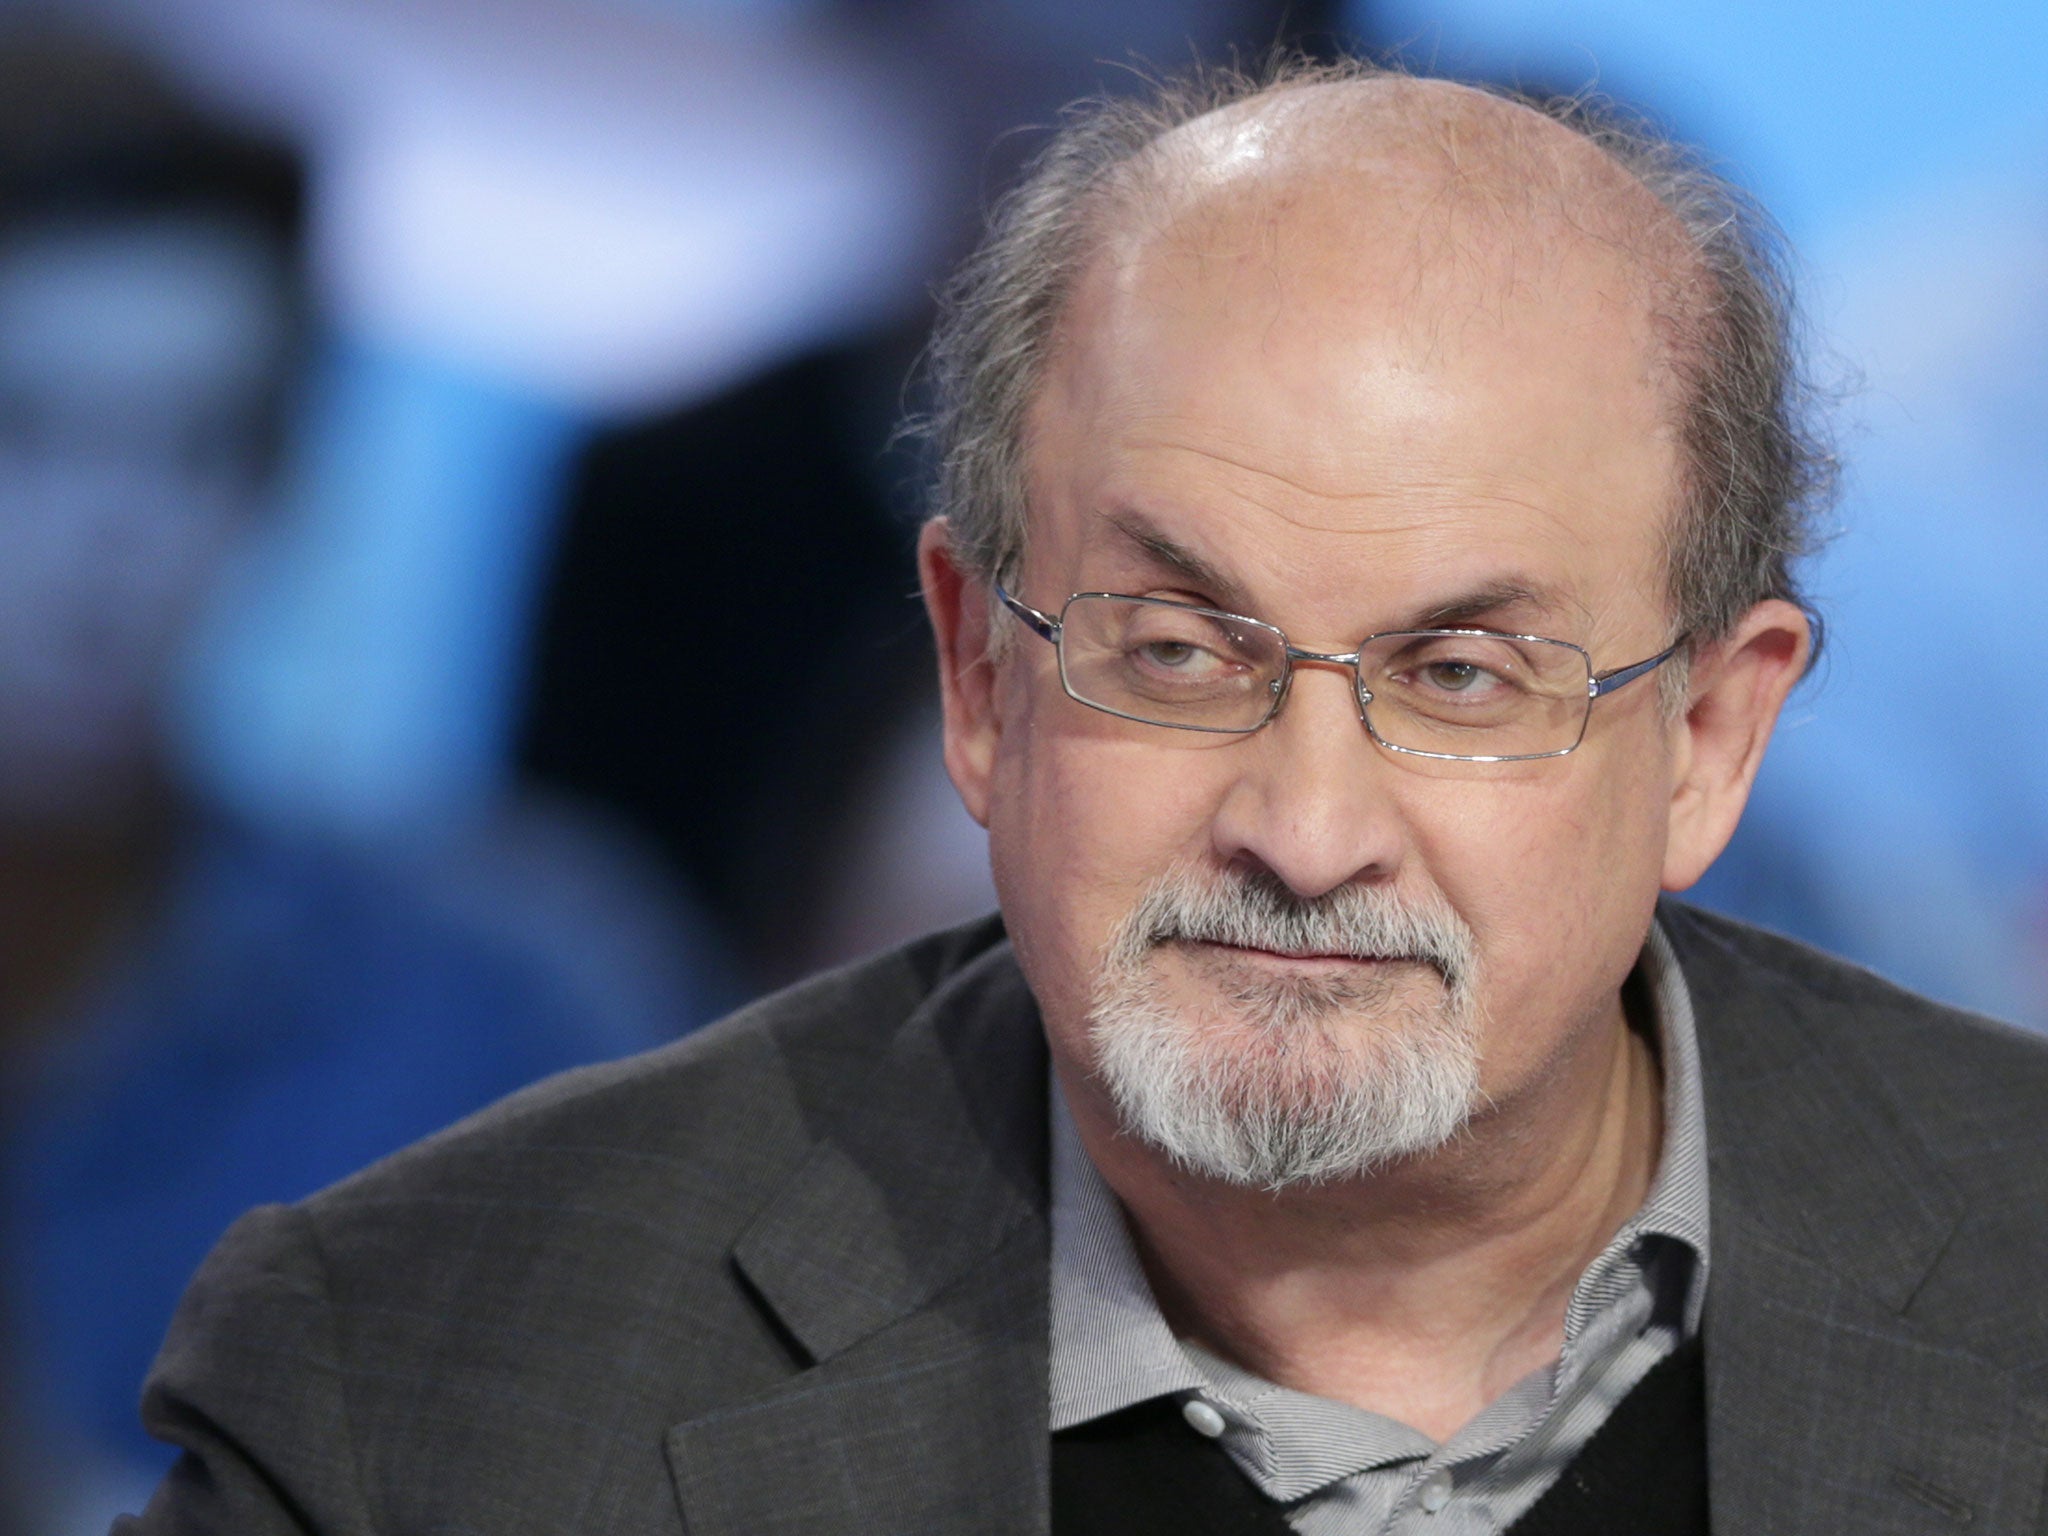 Salman Rushdie is the 2014 recipient of the PEN/Pinter Prize for outstanding literary achievement